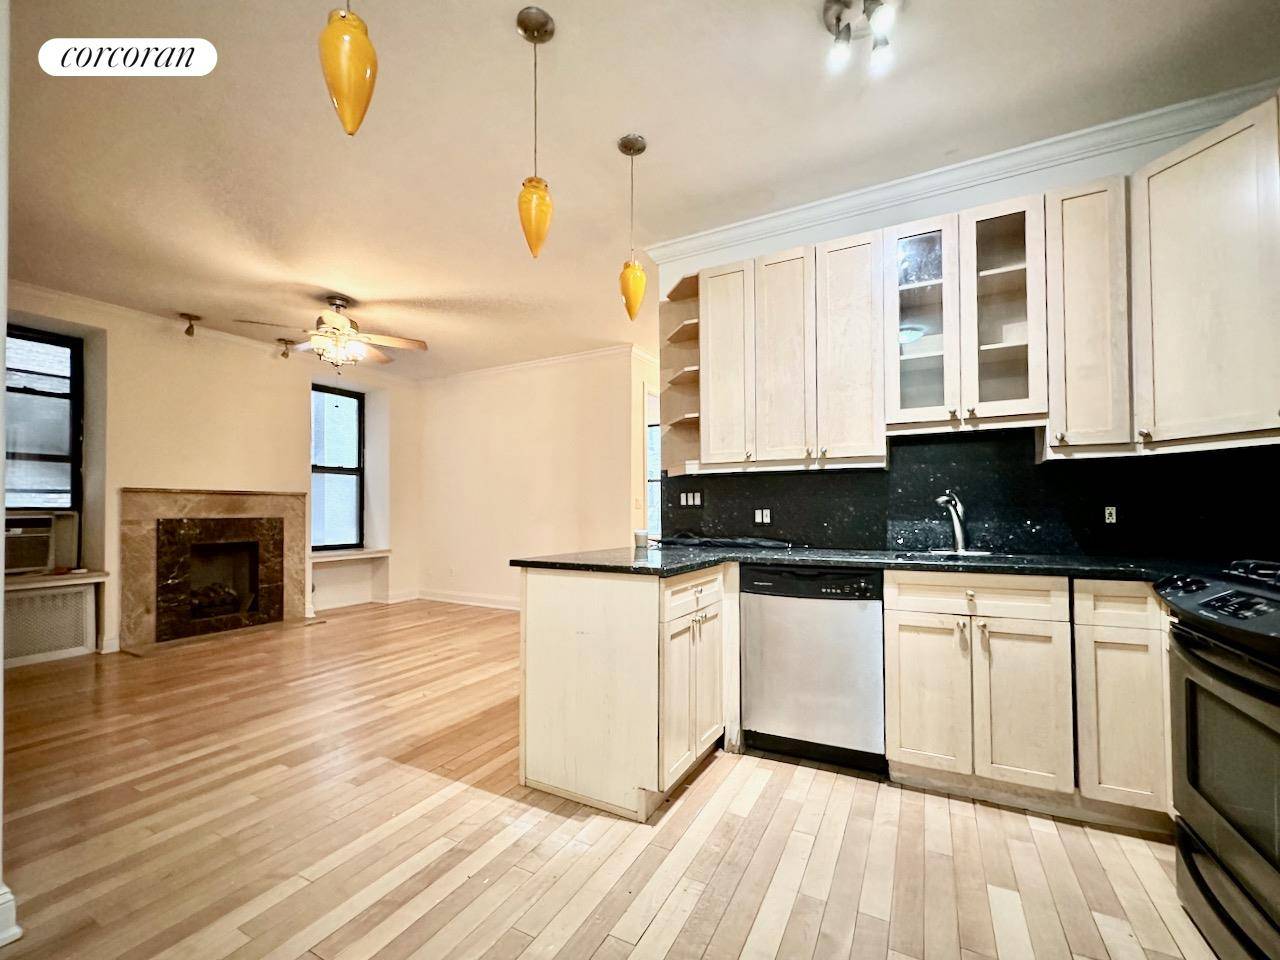 This large, renovated 3 bedroom feels like a true home in the heart of beautiful Hamilton HeightsPartial open style kitchen has newer Frigidaire and stainless steel appliances including dishwasher amp ...